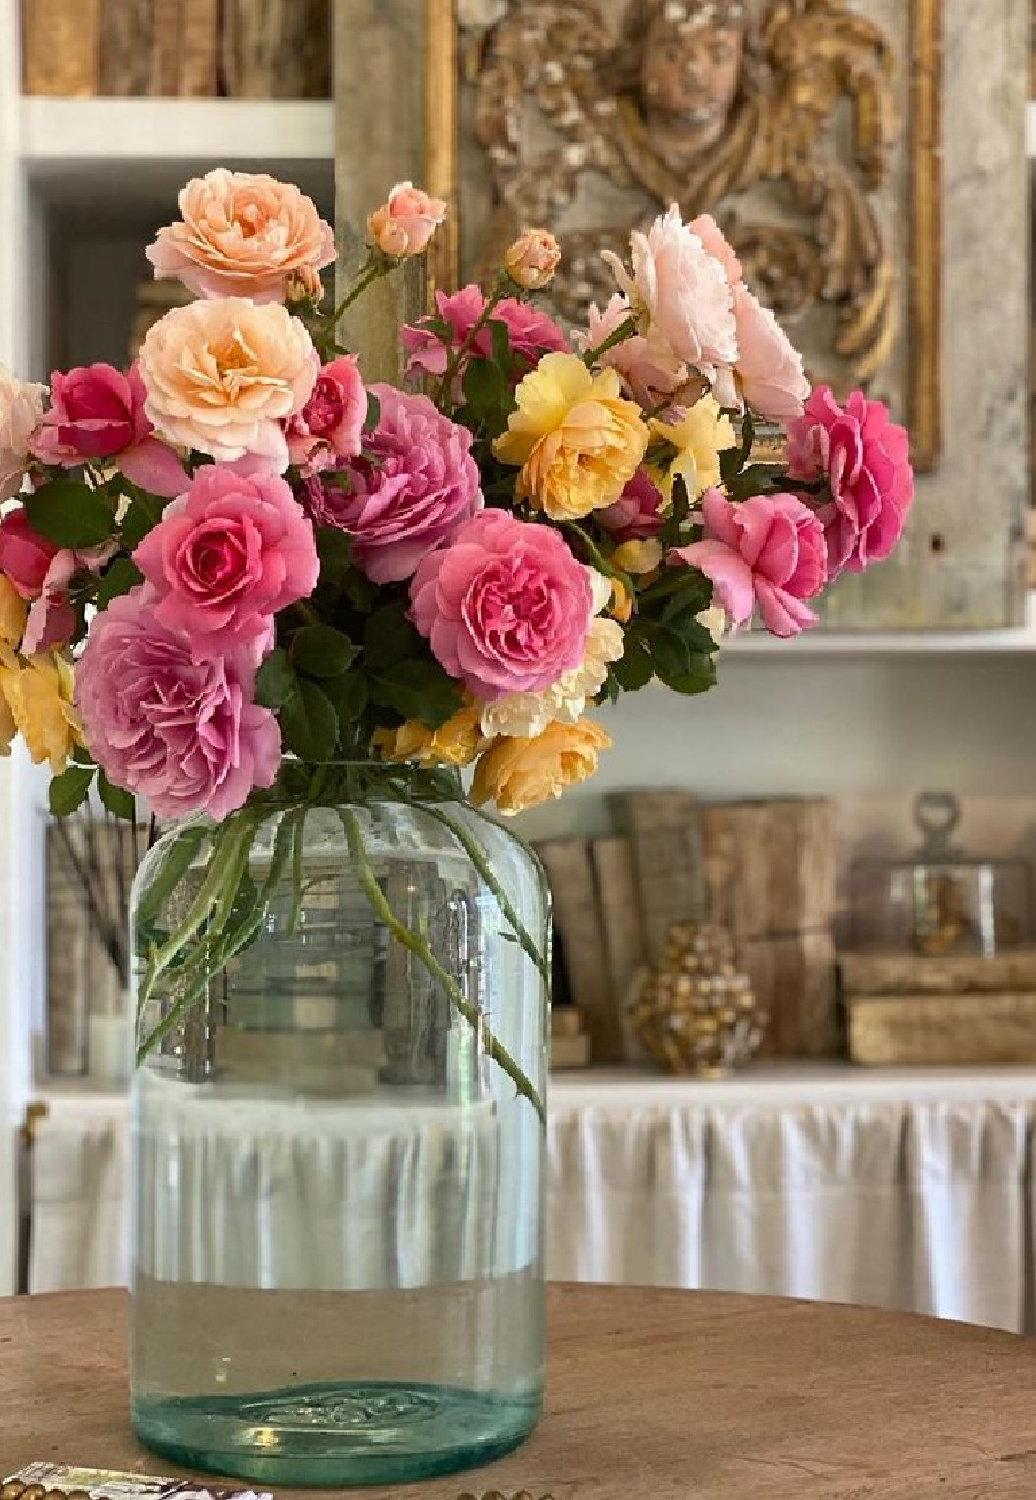 Gorgeous colorful blooming roses in a green glass jug vase in a French farmhouse inspired kitchen at Patina Farm by Brooke Giannetti. #patinafarm #frenchfarmhousekitchen #floralarrangements #frenchcountrystyle